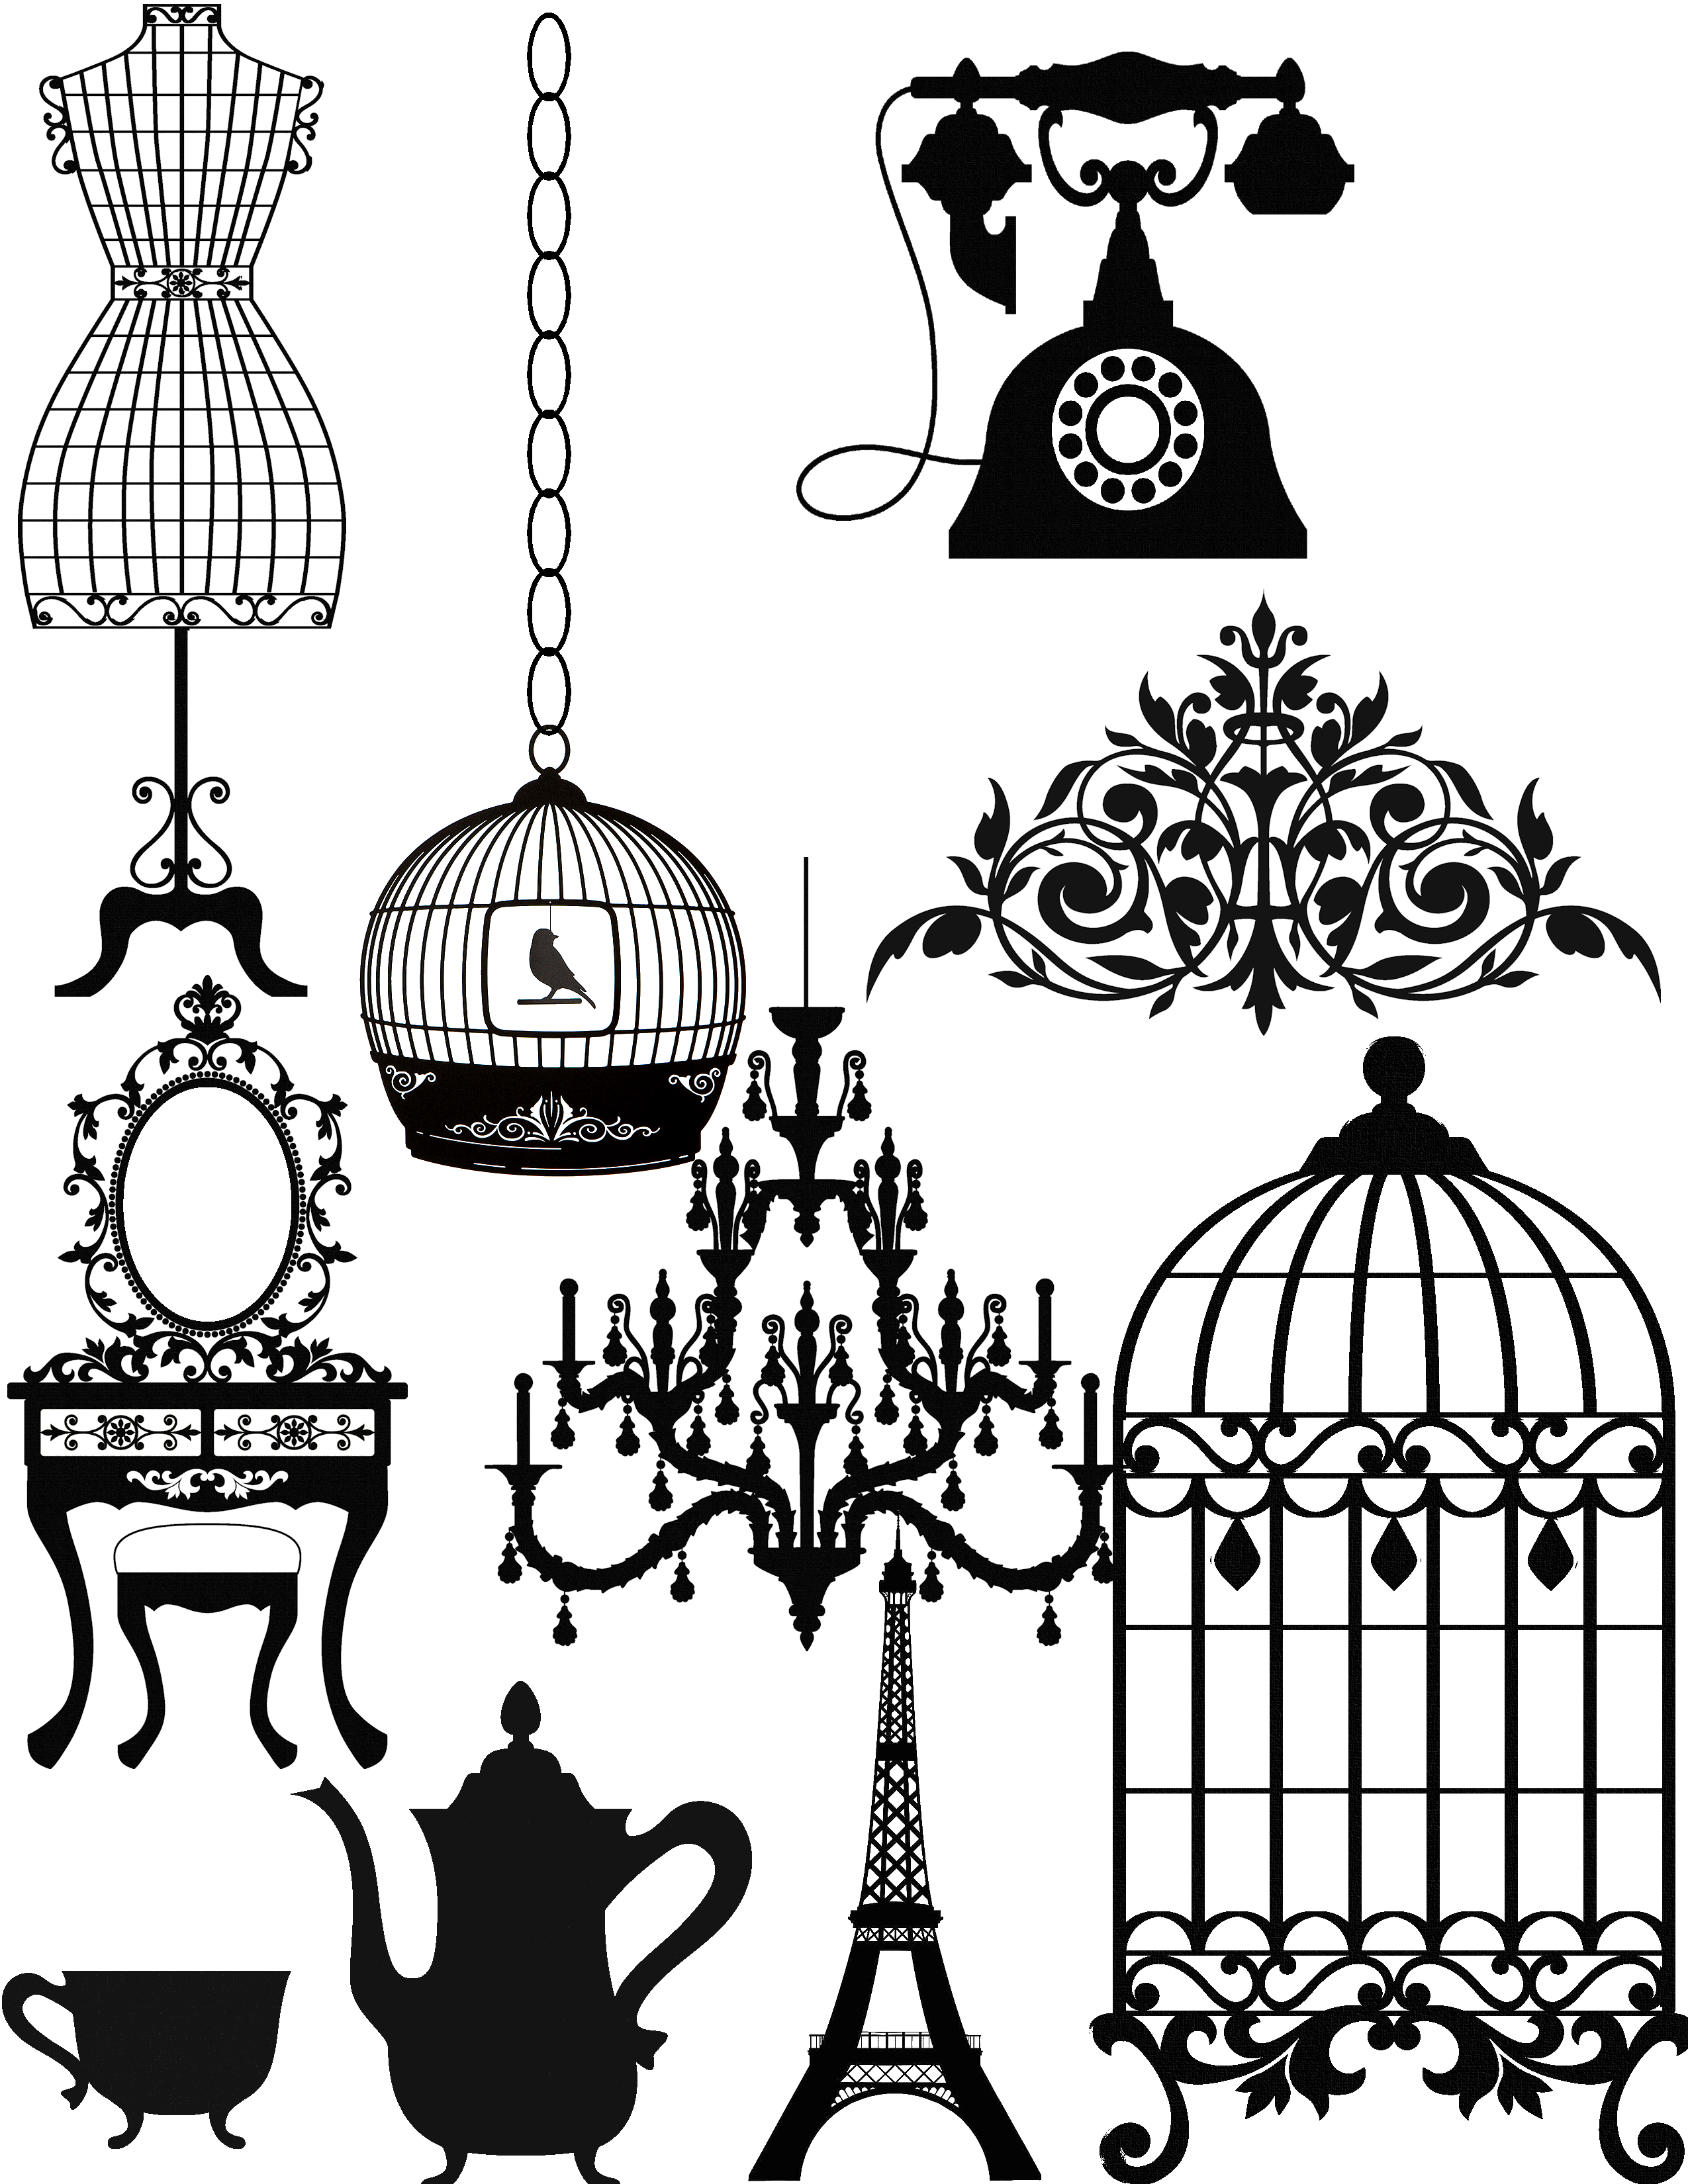 Collage get link to. Paris clipart bistro french